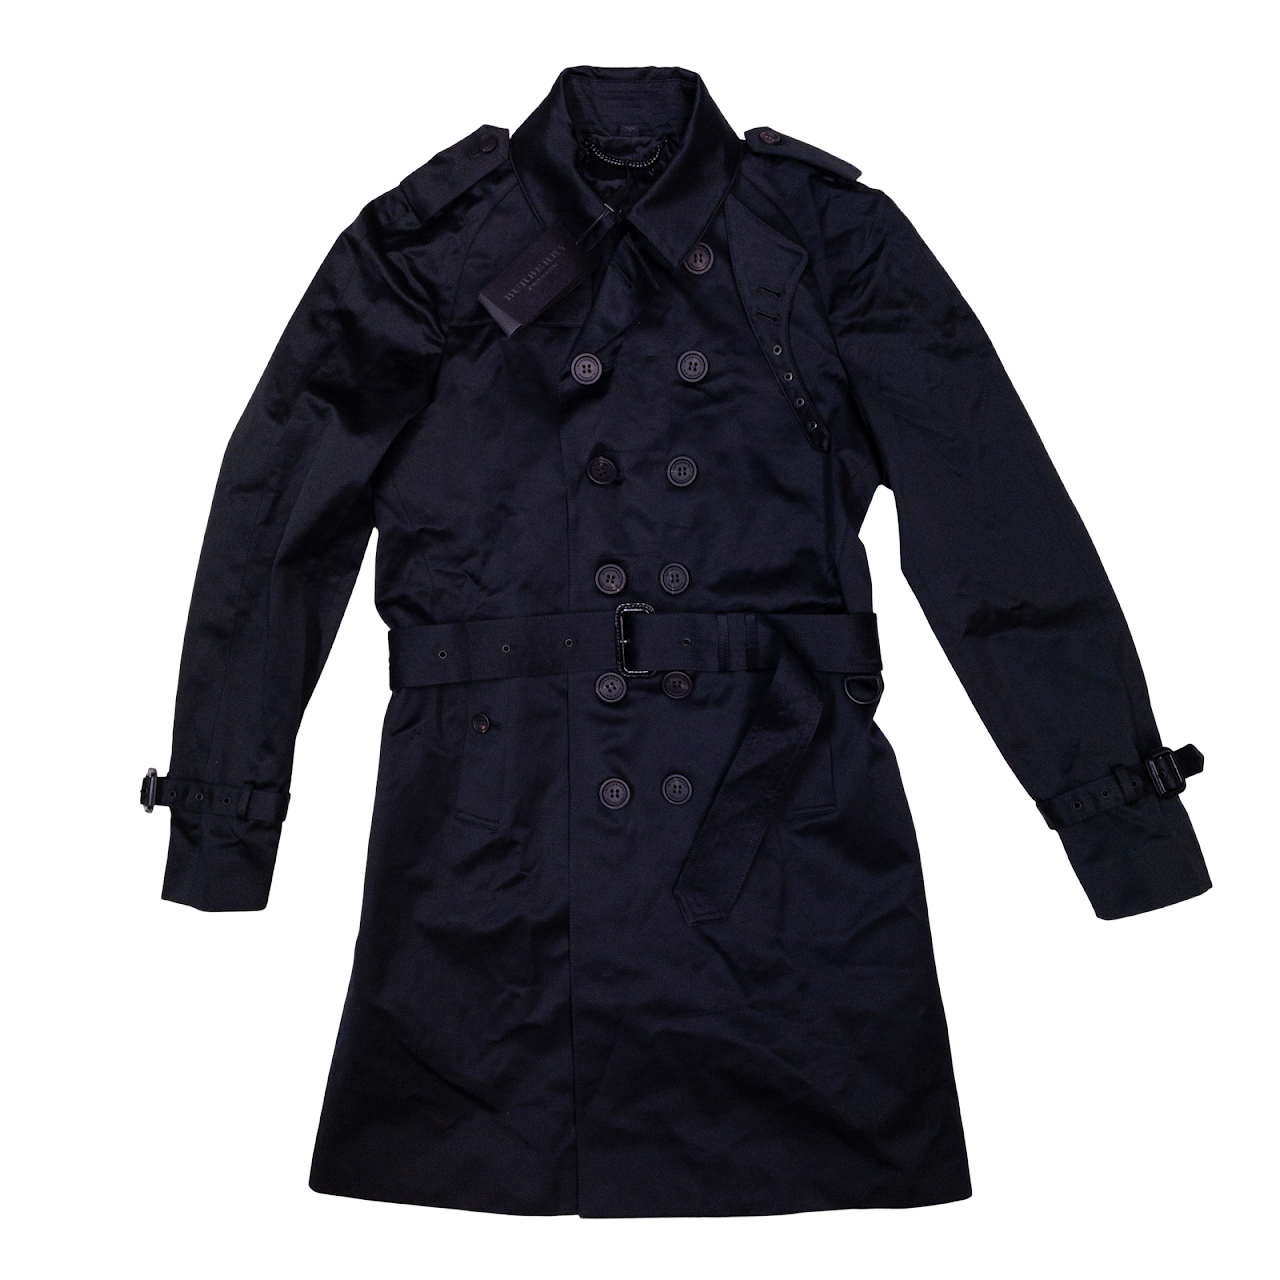 Burberry Prorsum Belted Trench